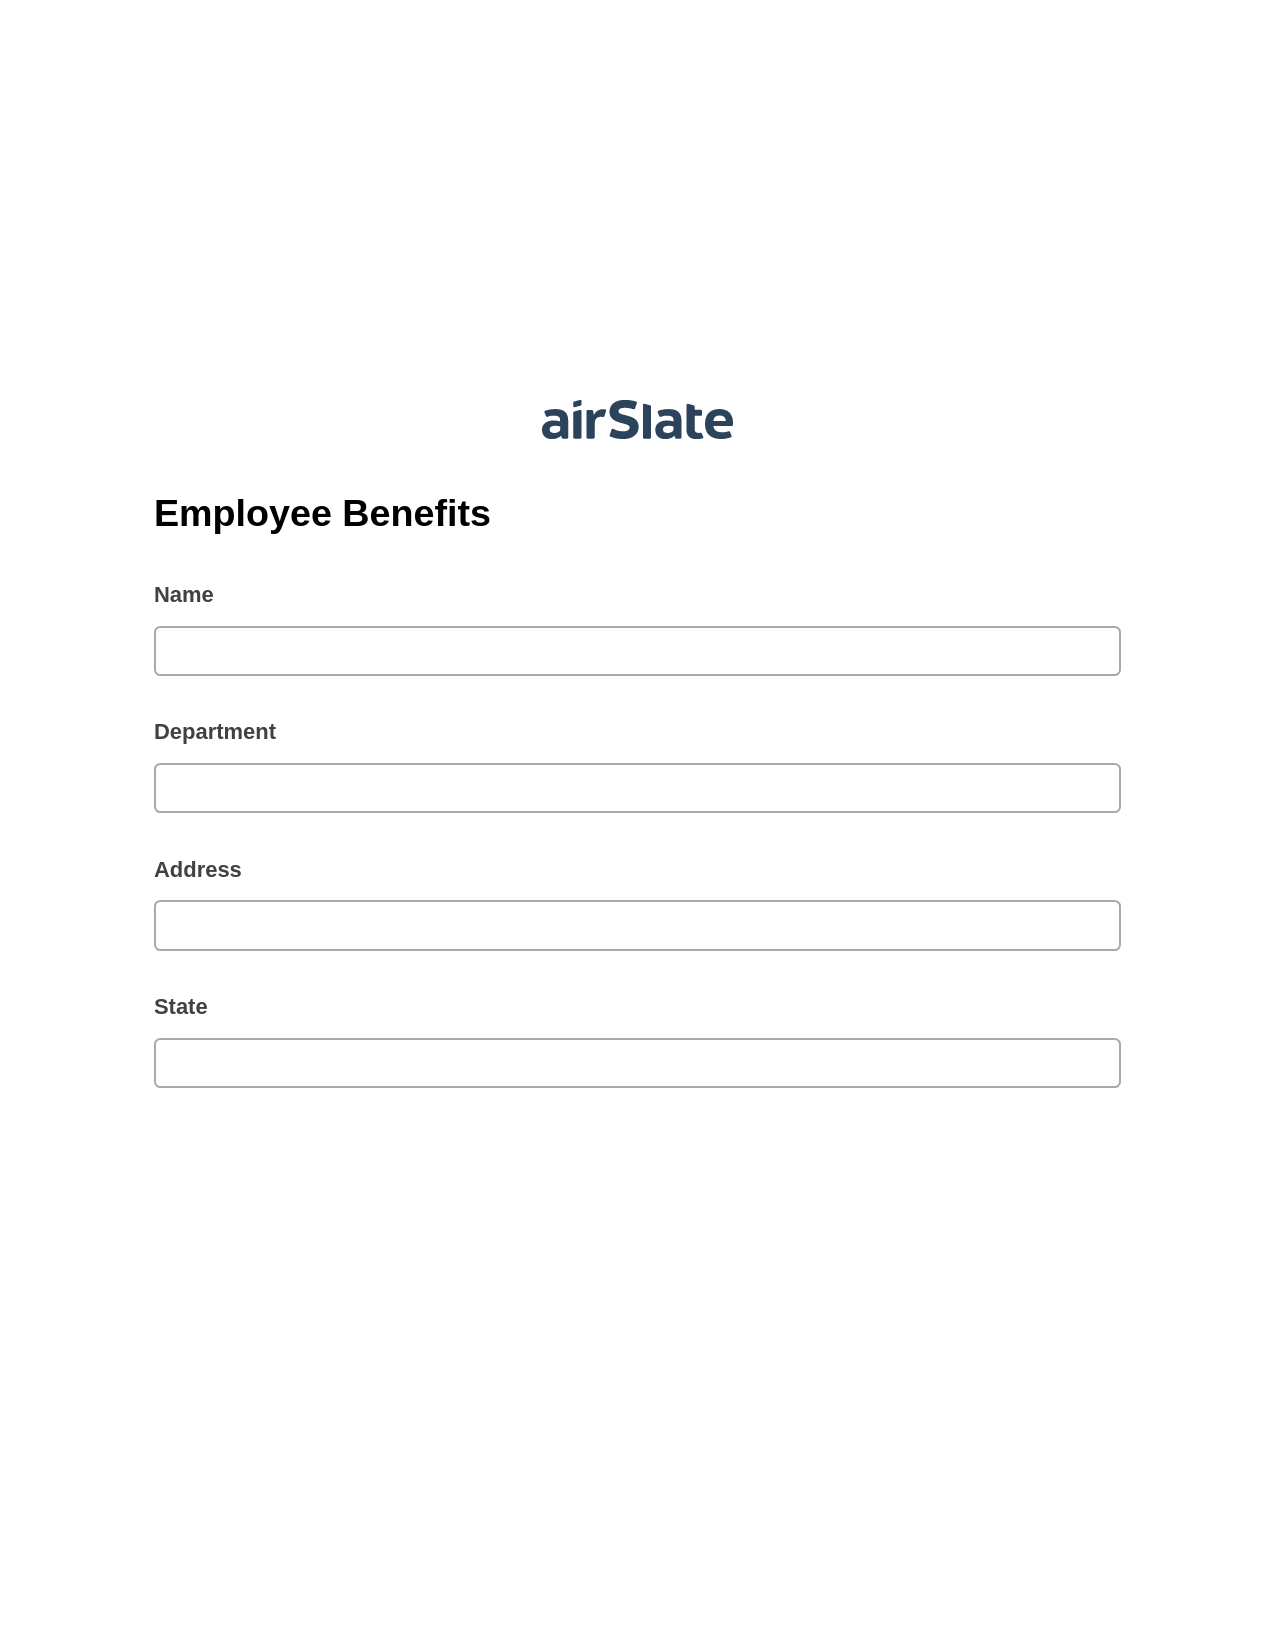 Employee Benefits Pre-fill from CSV File Bot, Create slate bot, Export to Smartsheet